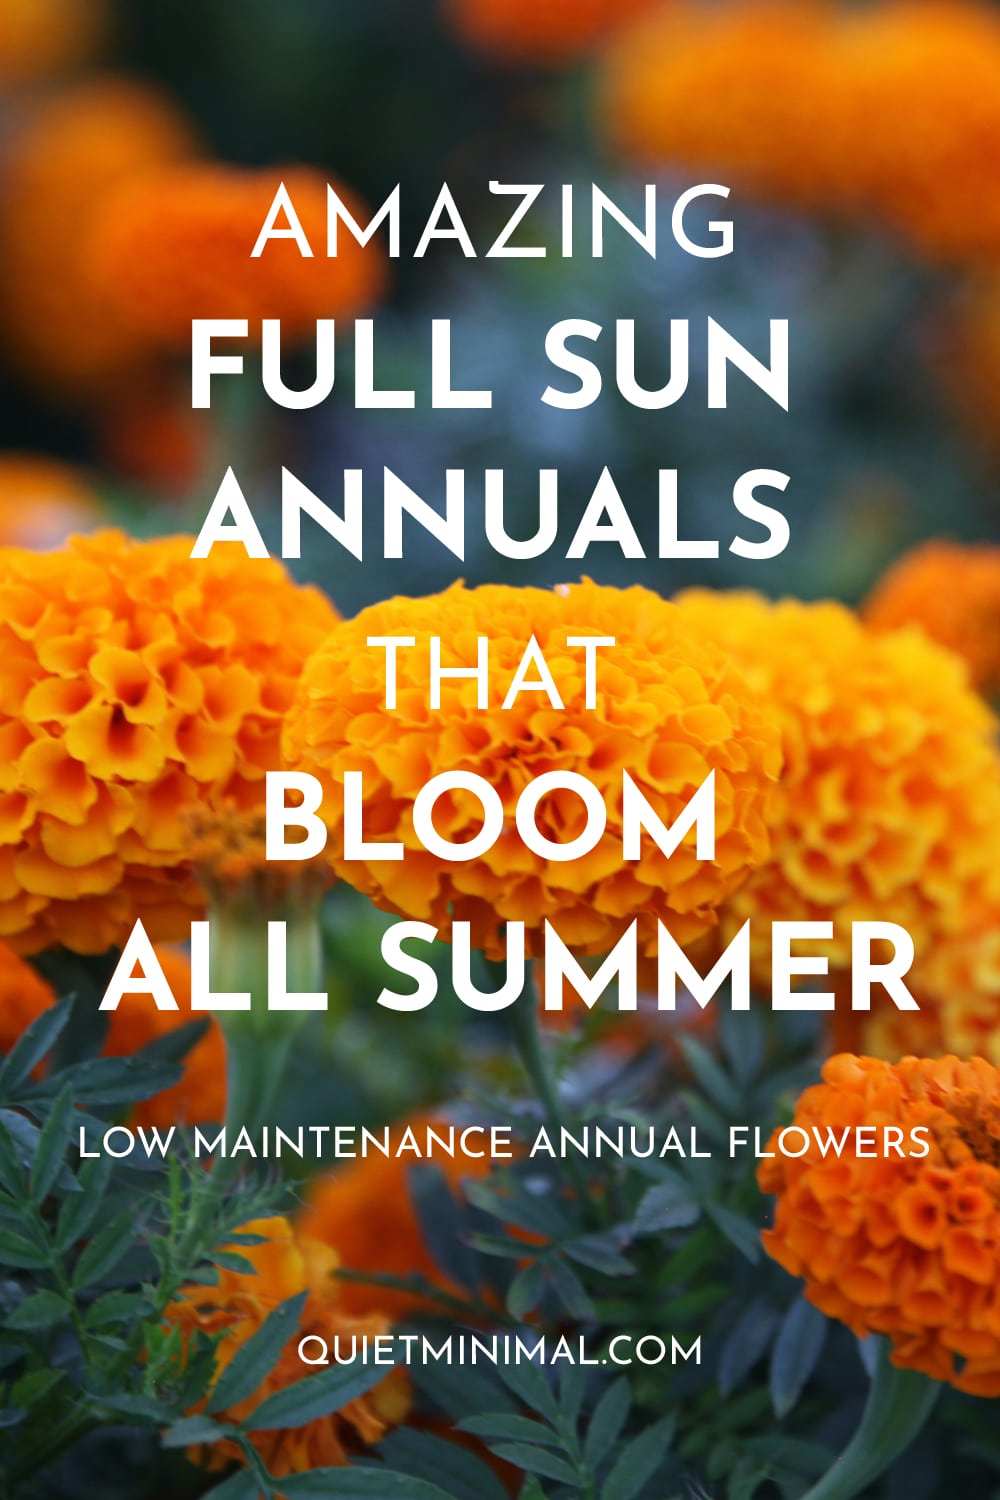 annuals that bloom all summer